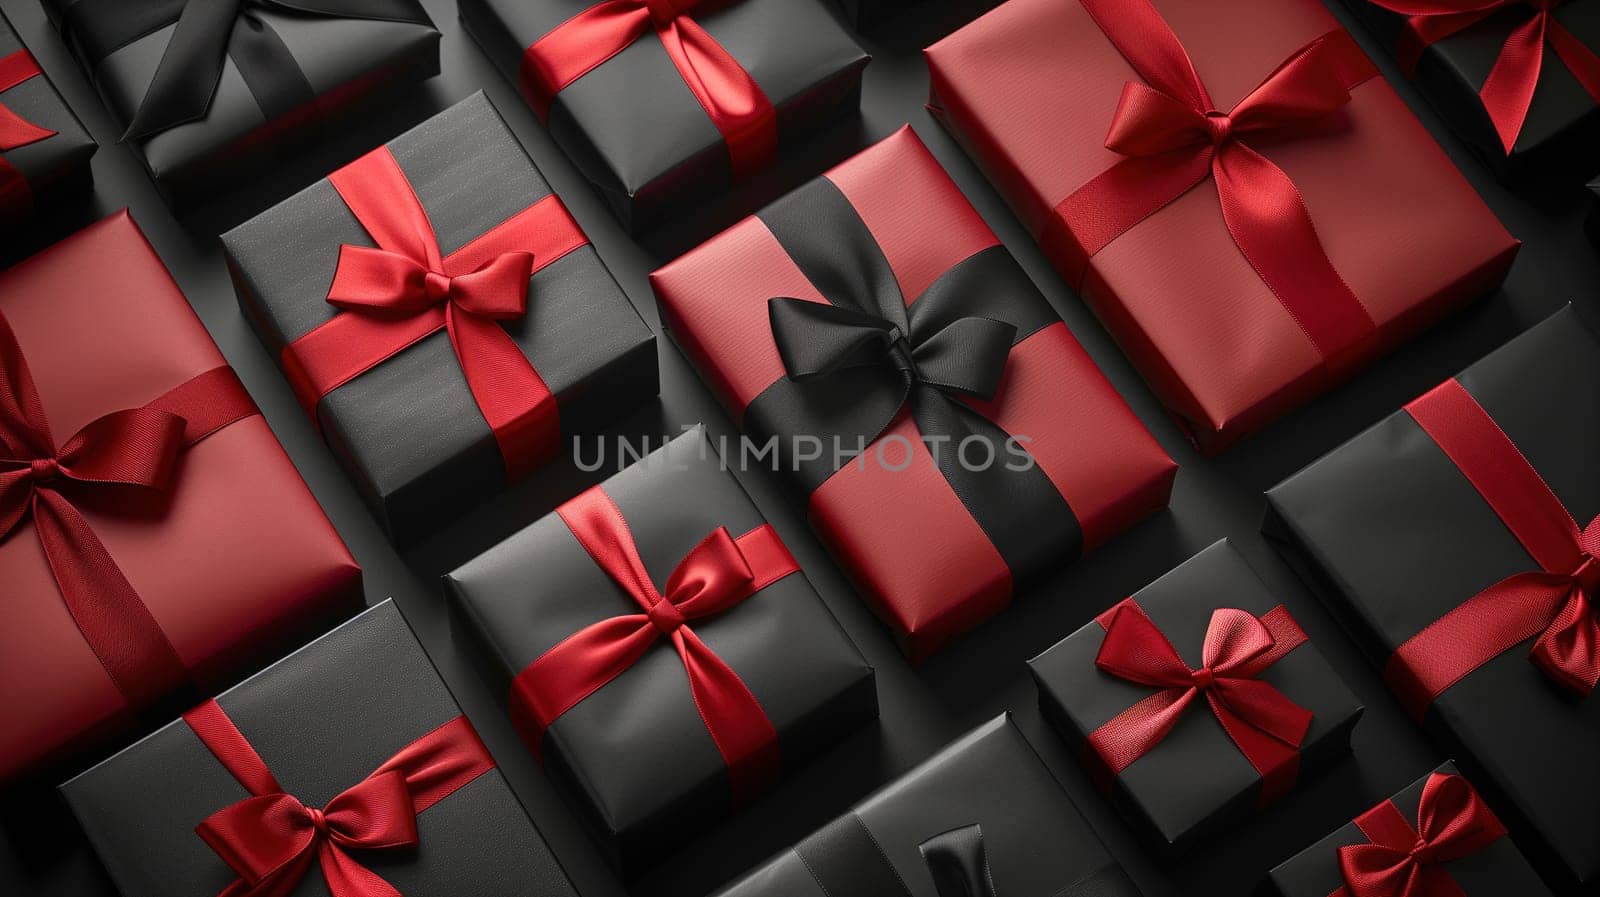 A variety of red and black wrapped presents are displayed for a sale, symbolizing the concept of Black Friday shopping. The gifts are neatly arranged in a festive manner, awaiting eager shoppers.